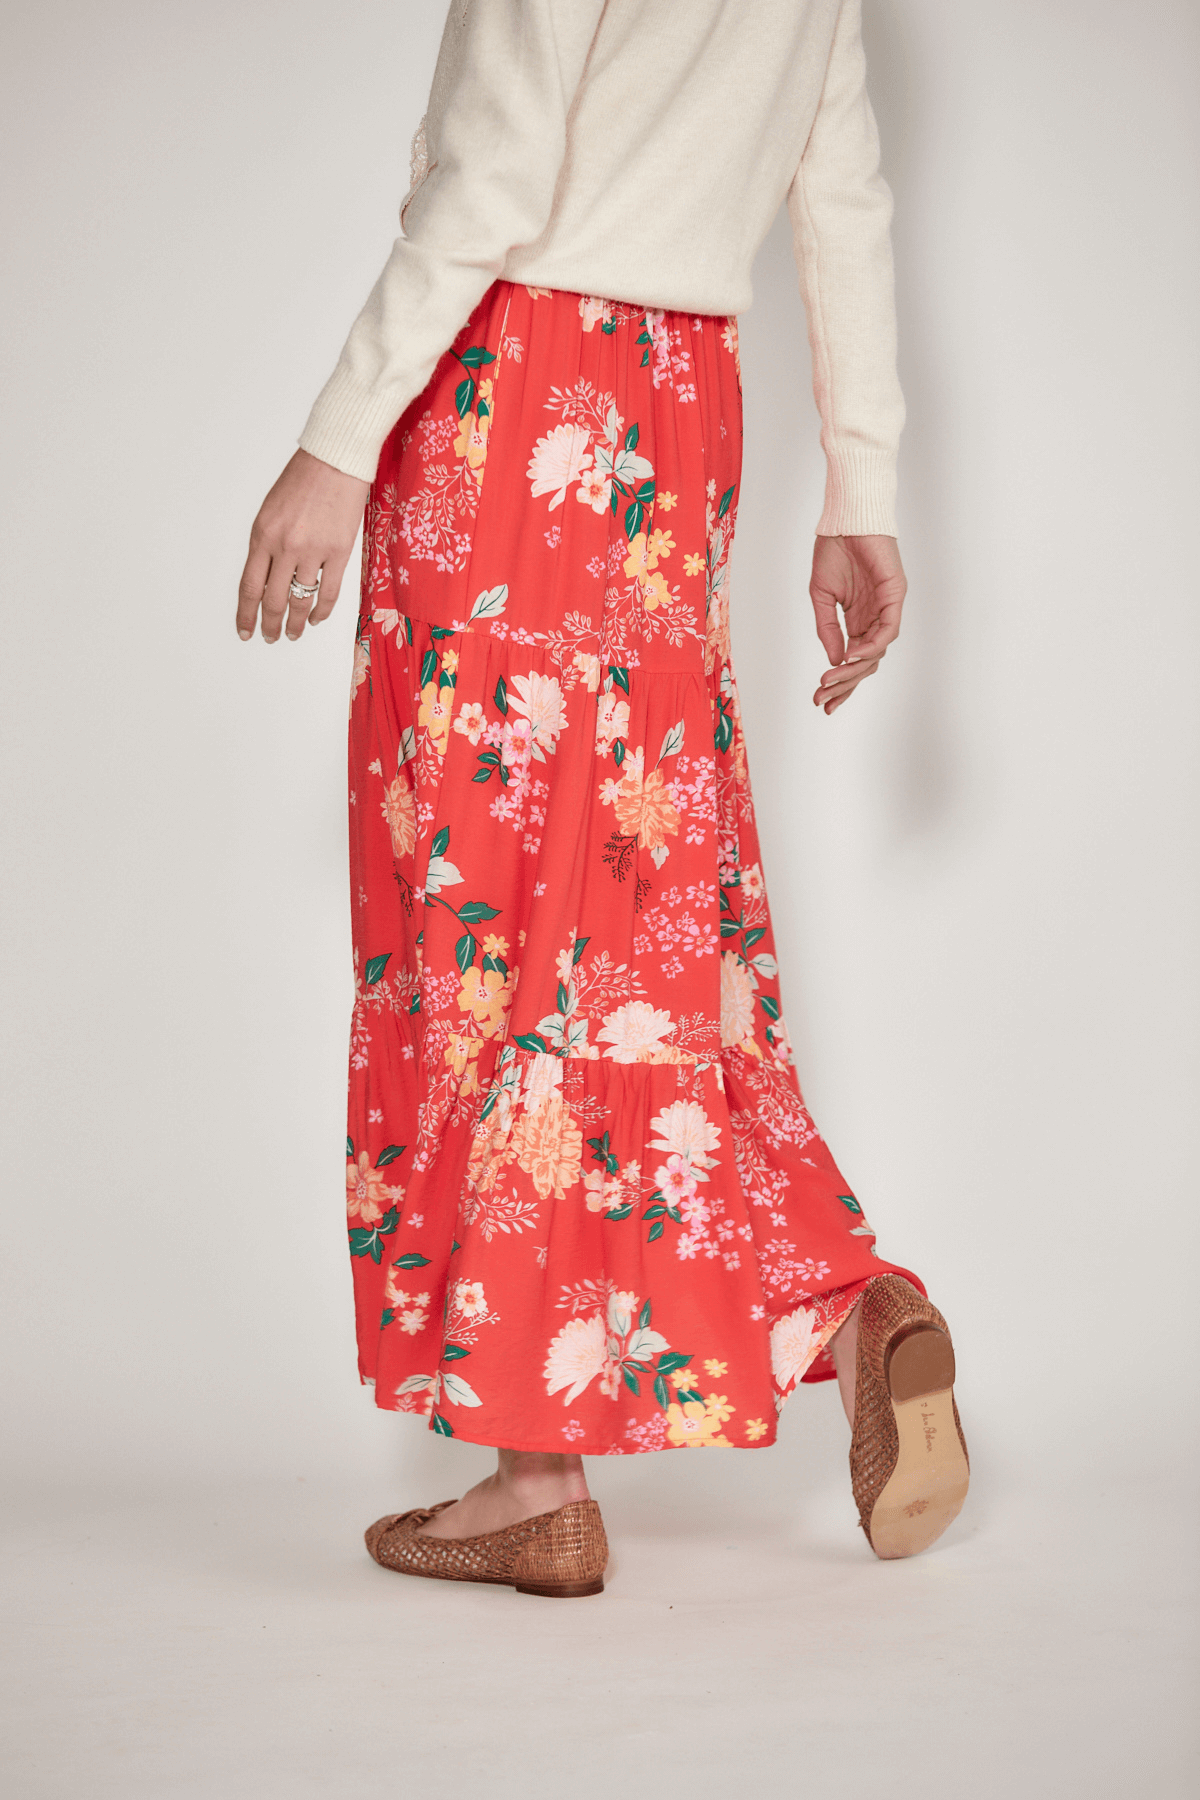 Skies Are Blue Floral Maxi Skirt